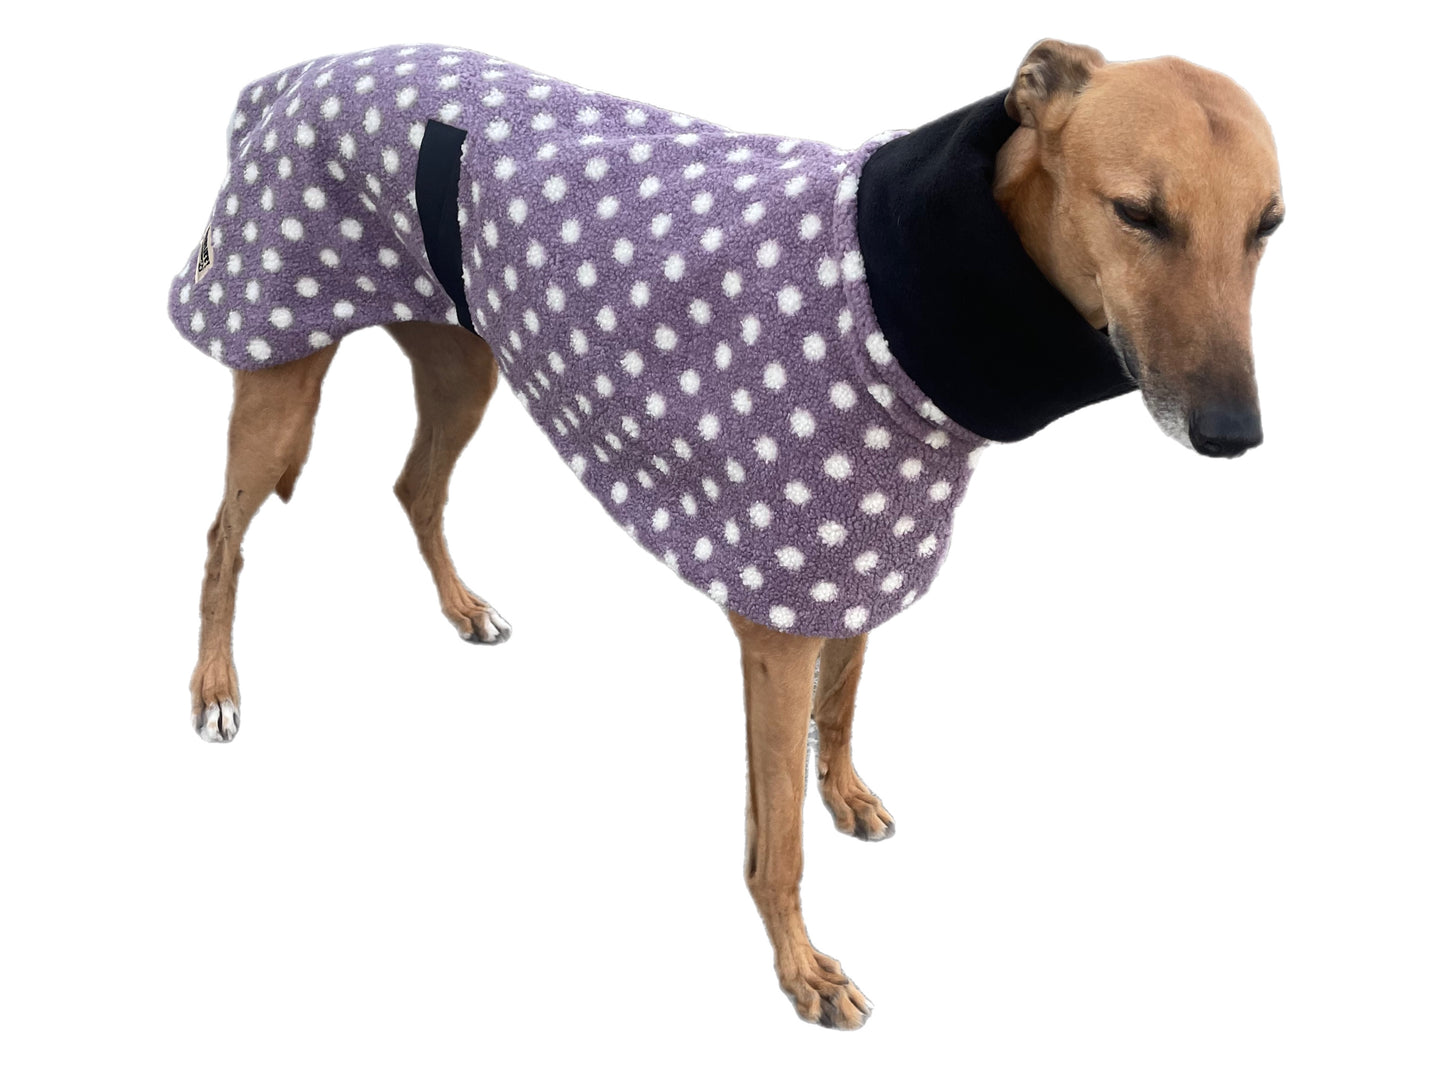 Violet Polka dot print Teddy fleece deluxe style greyhound coat with snuggly wide neck roll